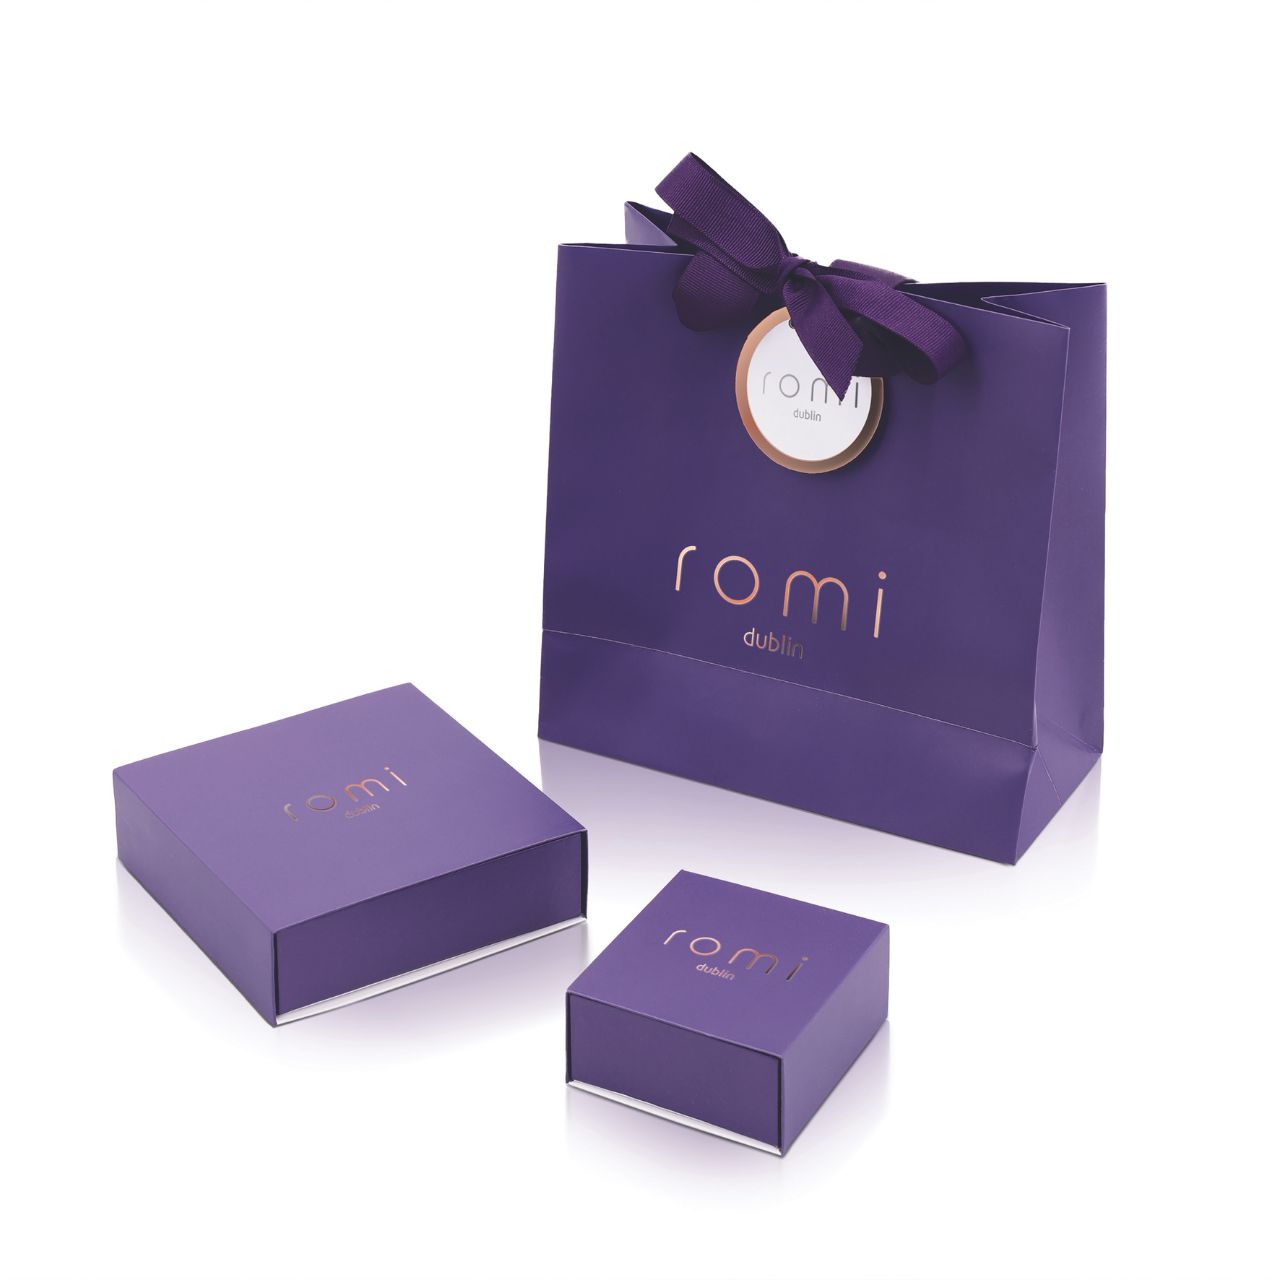 Romi Dublin Silver Bent Pave Earrings  This easy-to-wear jewellery collection was inspired by daughter Romi who loves to style and accessorise. An outfit isn’t complete until the perfect pieces of jewellery and accessories have been selected to enhance it.